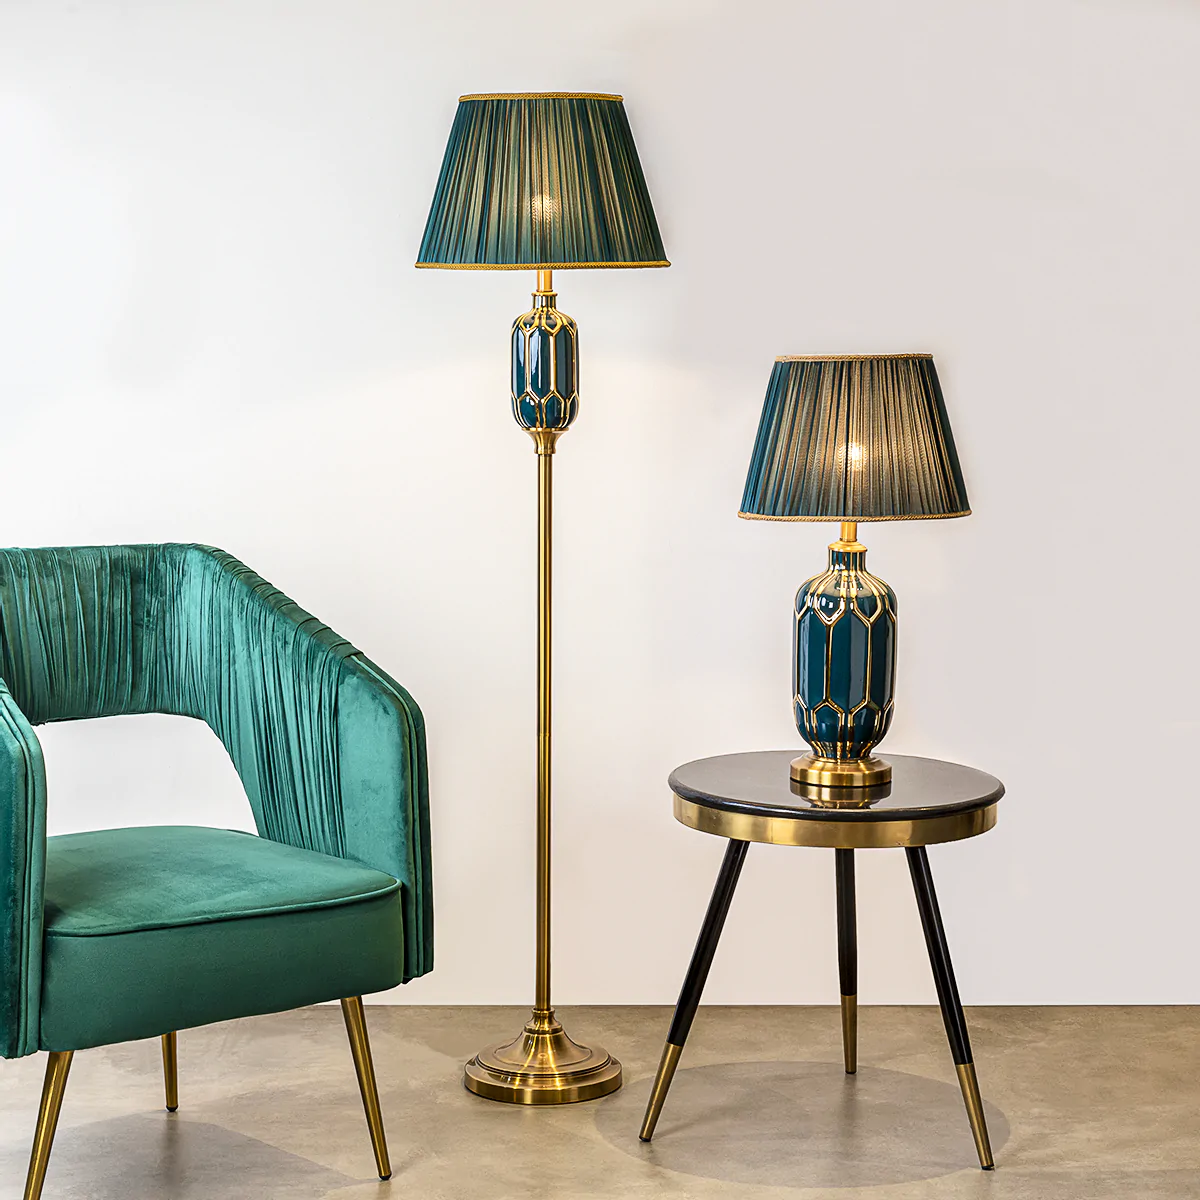 an exquisite standing light for ،mes, with green shade giving a royal vibe, available online in many colours and styles just like uplighters, placed near an armchair, table lamp placed on side table, wooden flooring